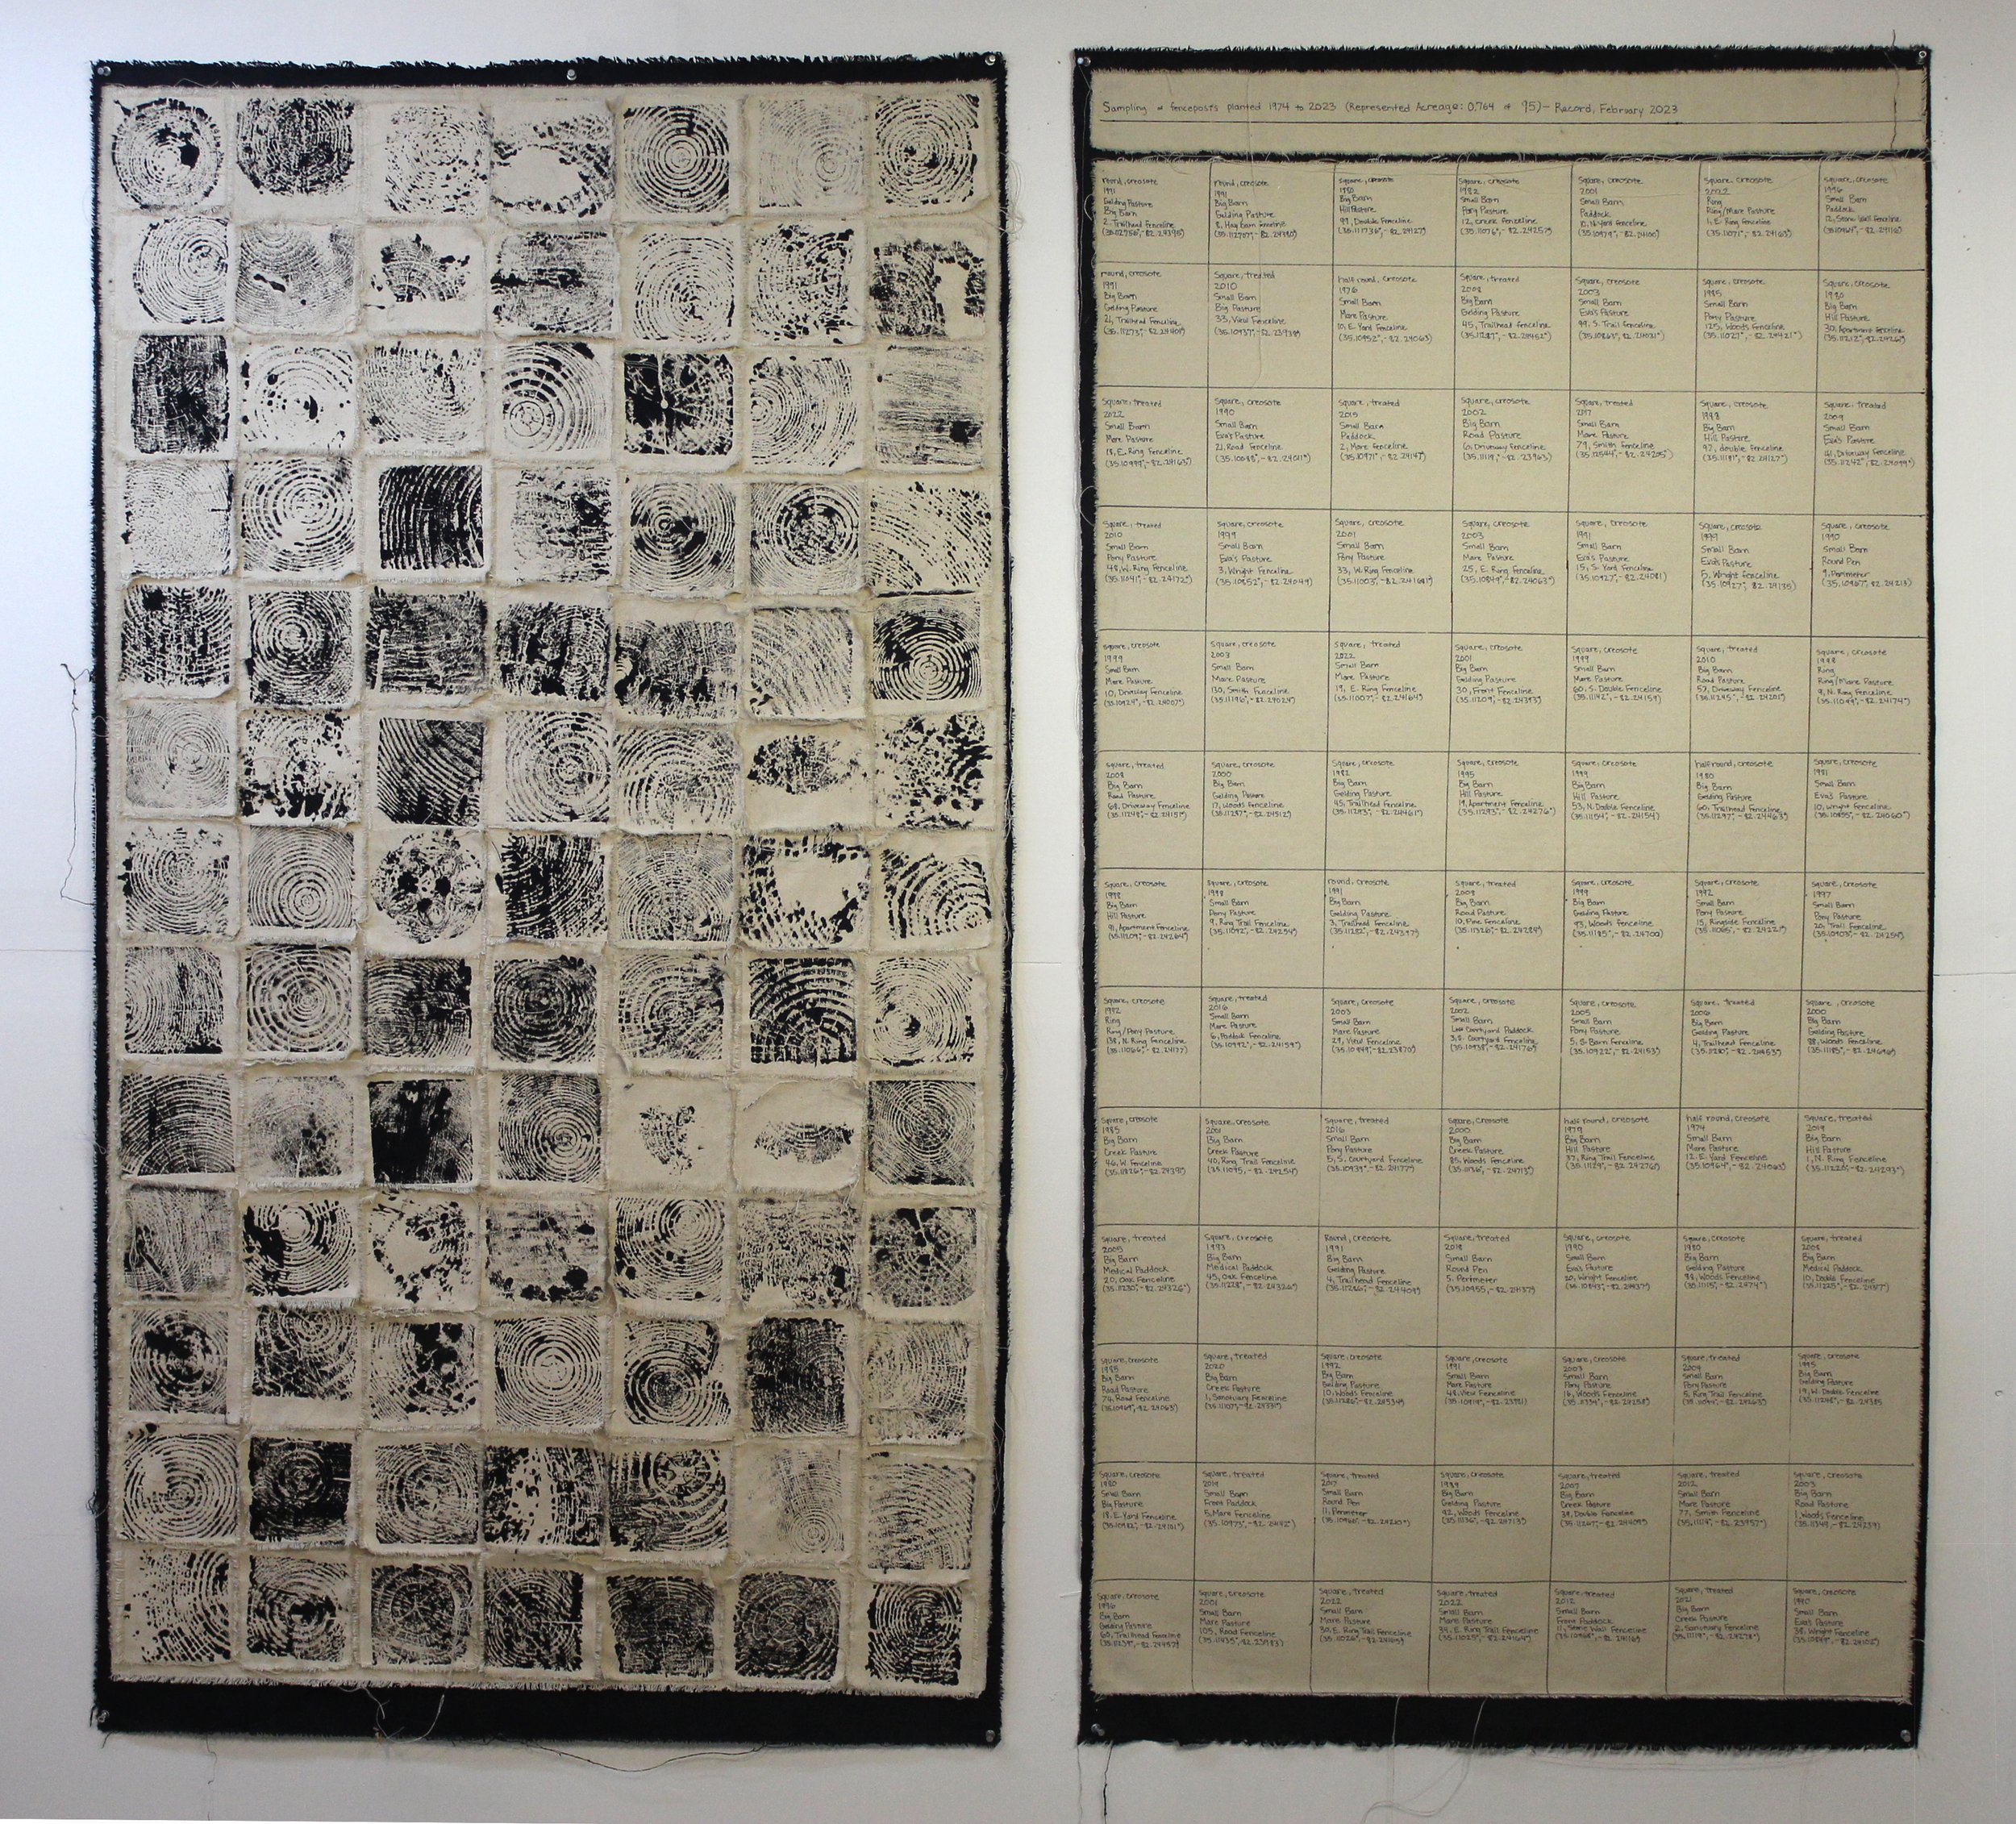   Sampling of Fenceposts 1974-2023 (0.764/95  Represented Acres) ,  Recorded February 2003 ,” 2023, acrylic on canvas, 65”x71” 